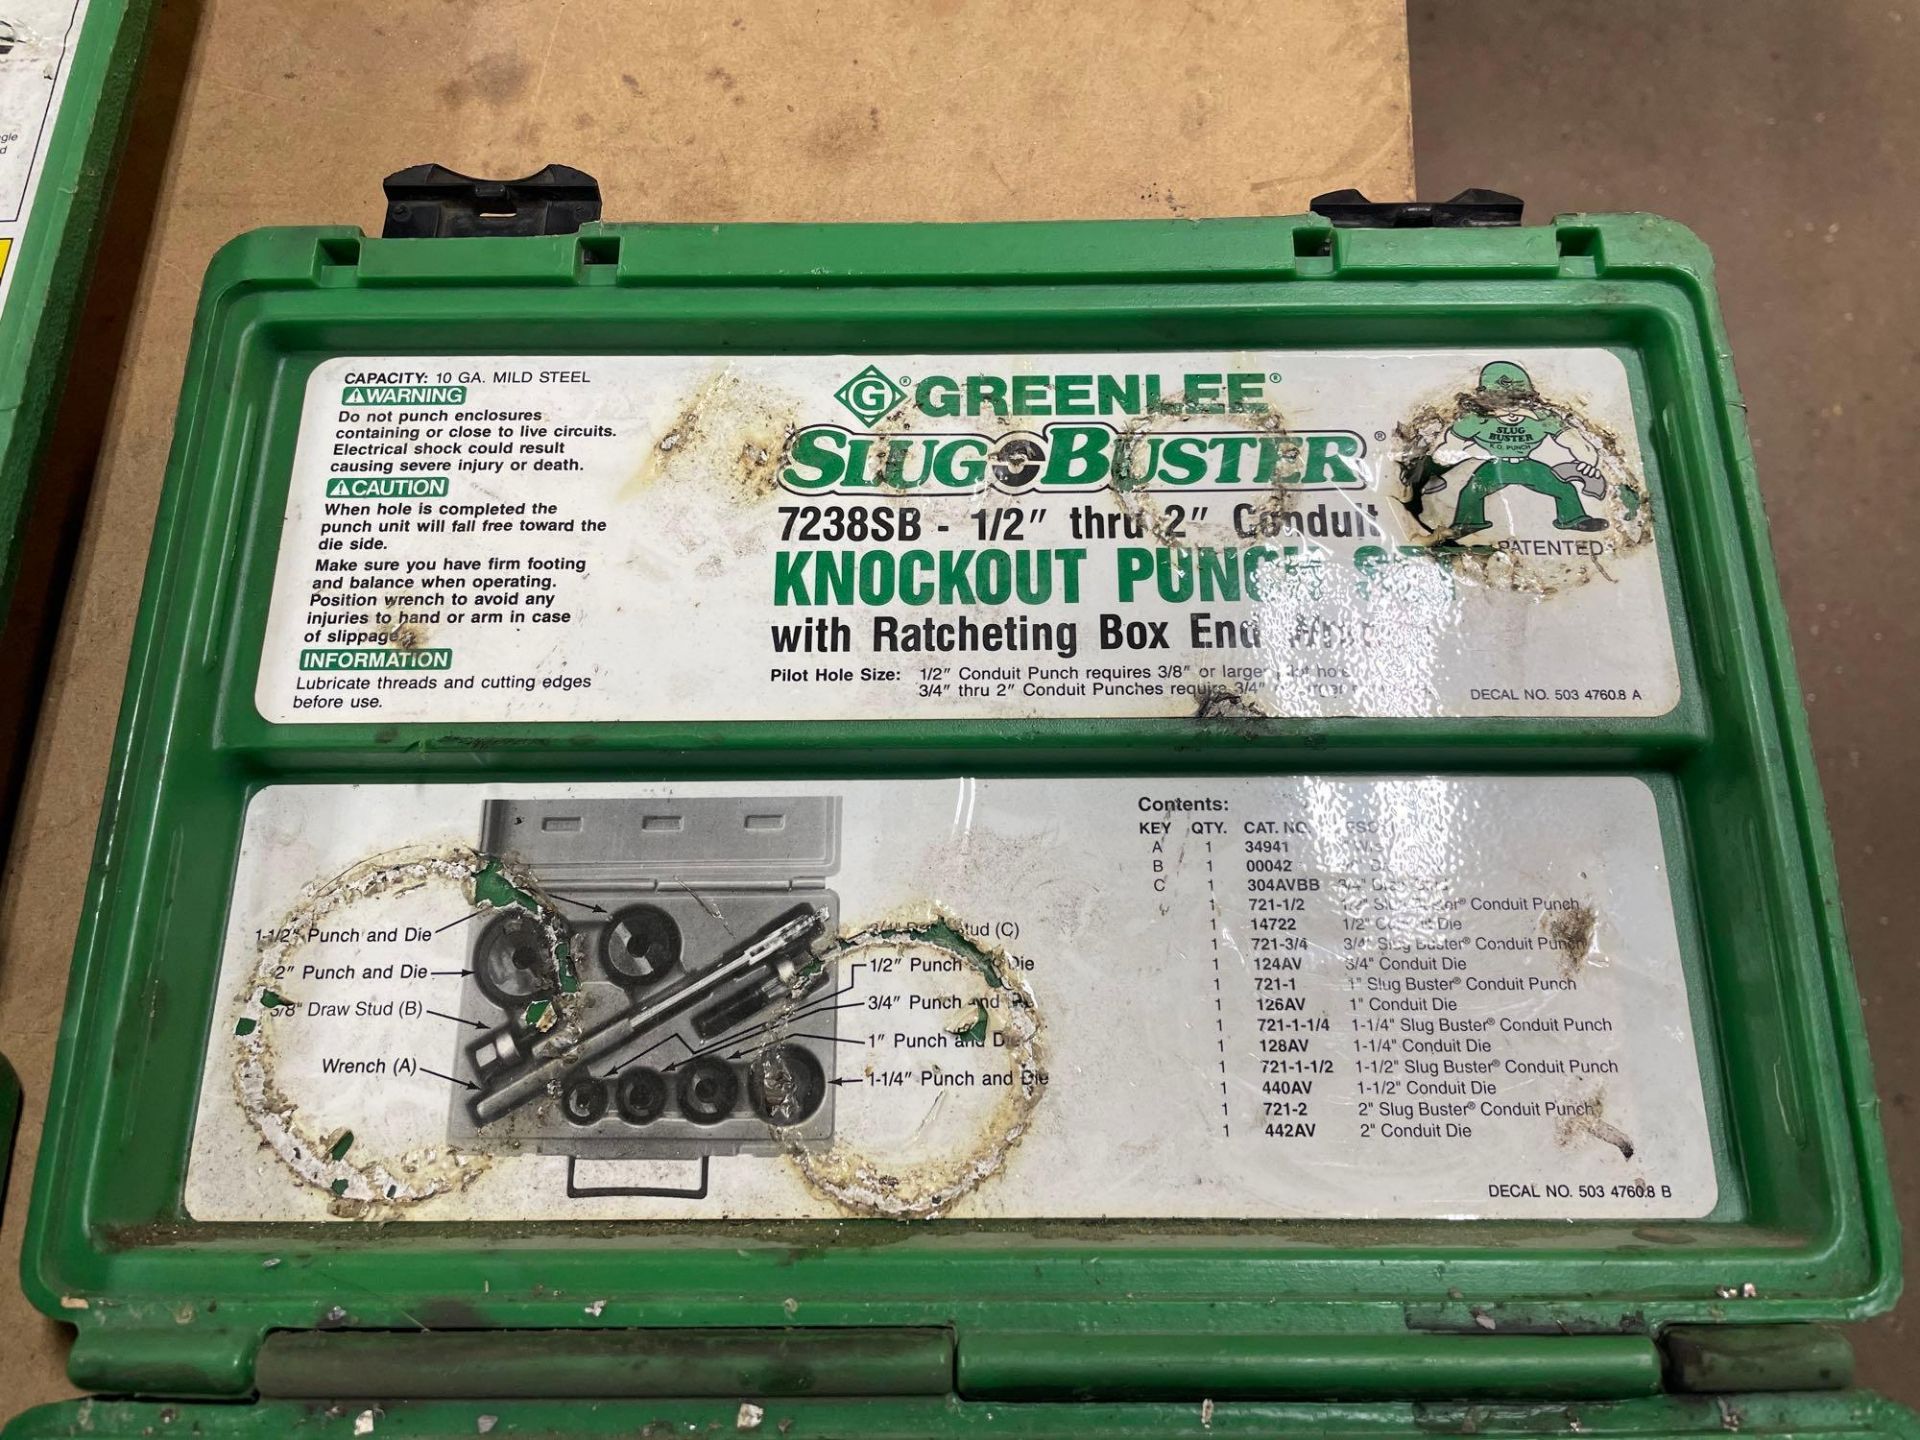 Greenlee Hydraulic Punch Driver/Knockout Punch Kits - Image 5 of 5